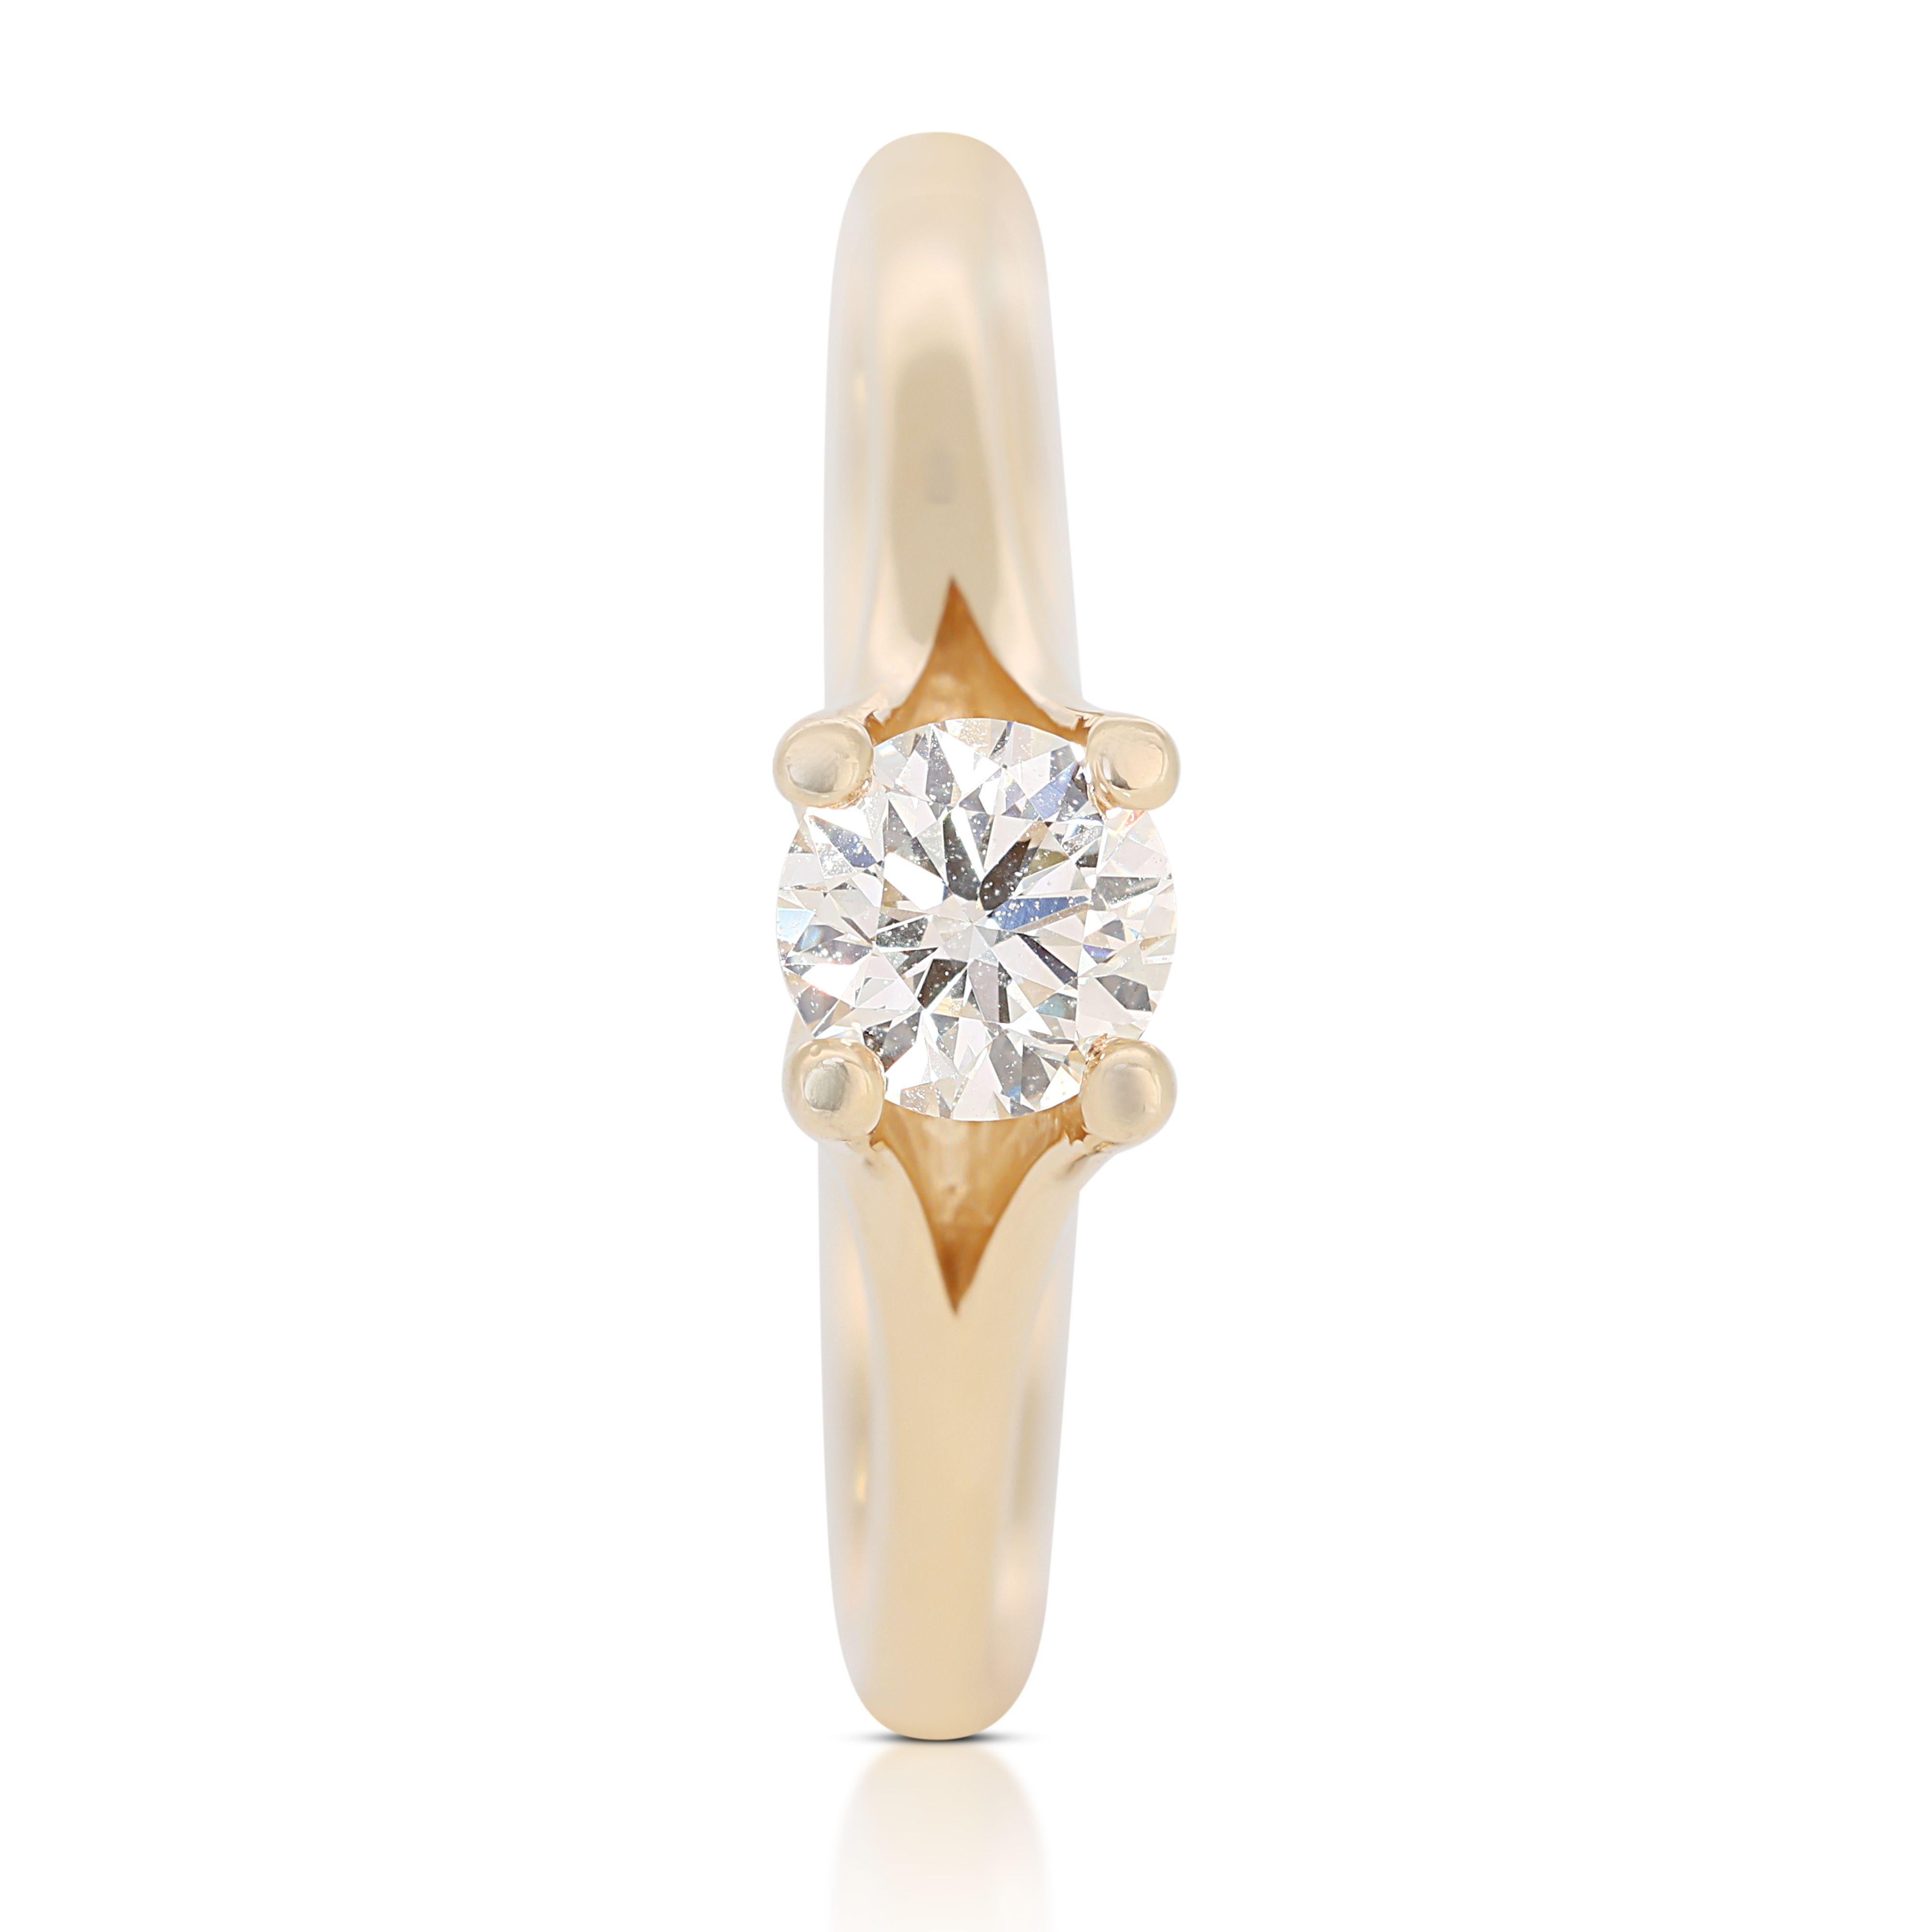 Enchanting Solitaire: 0.38 ct Diamond Shimmers in Warm 14K Gold For Sale 3